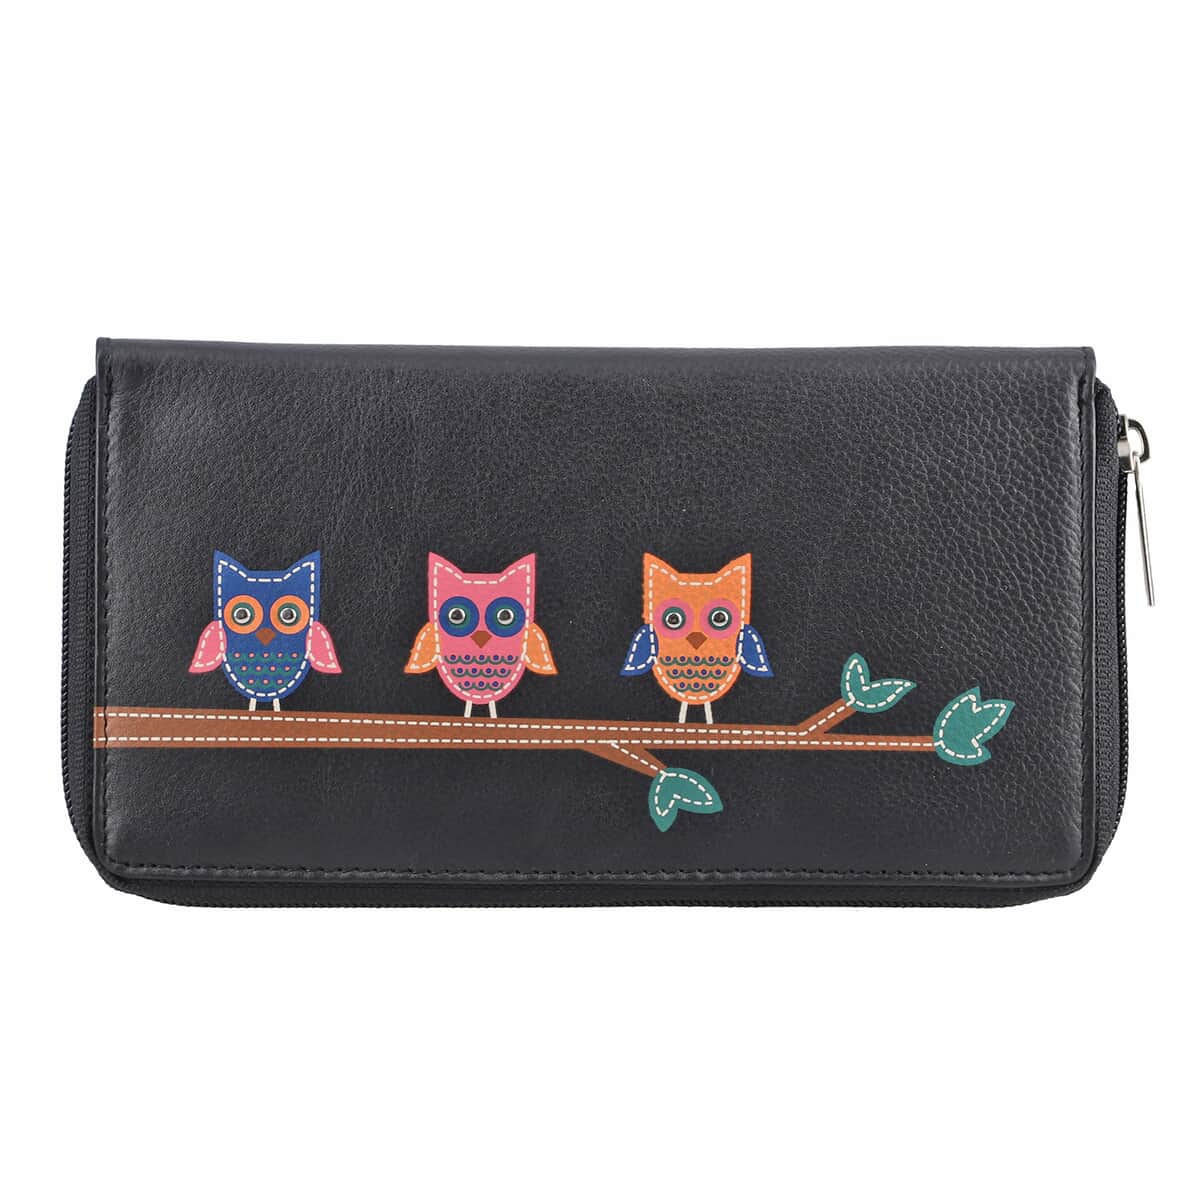 Union Code Black RFID Protected Genuine Leather Owl Family Applique Women's Wallet image number 0